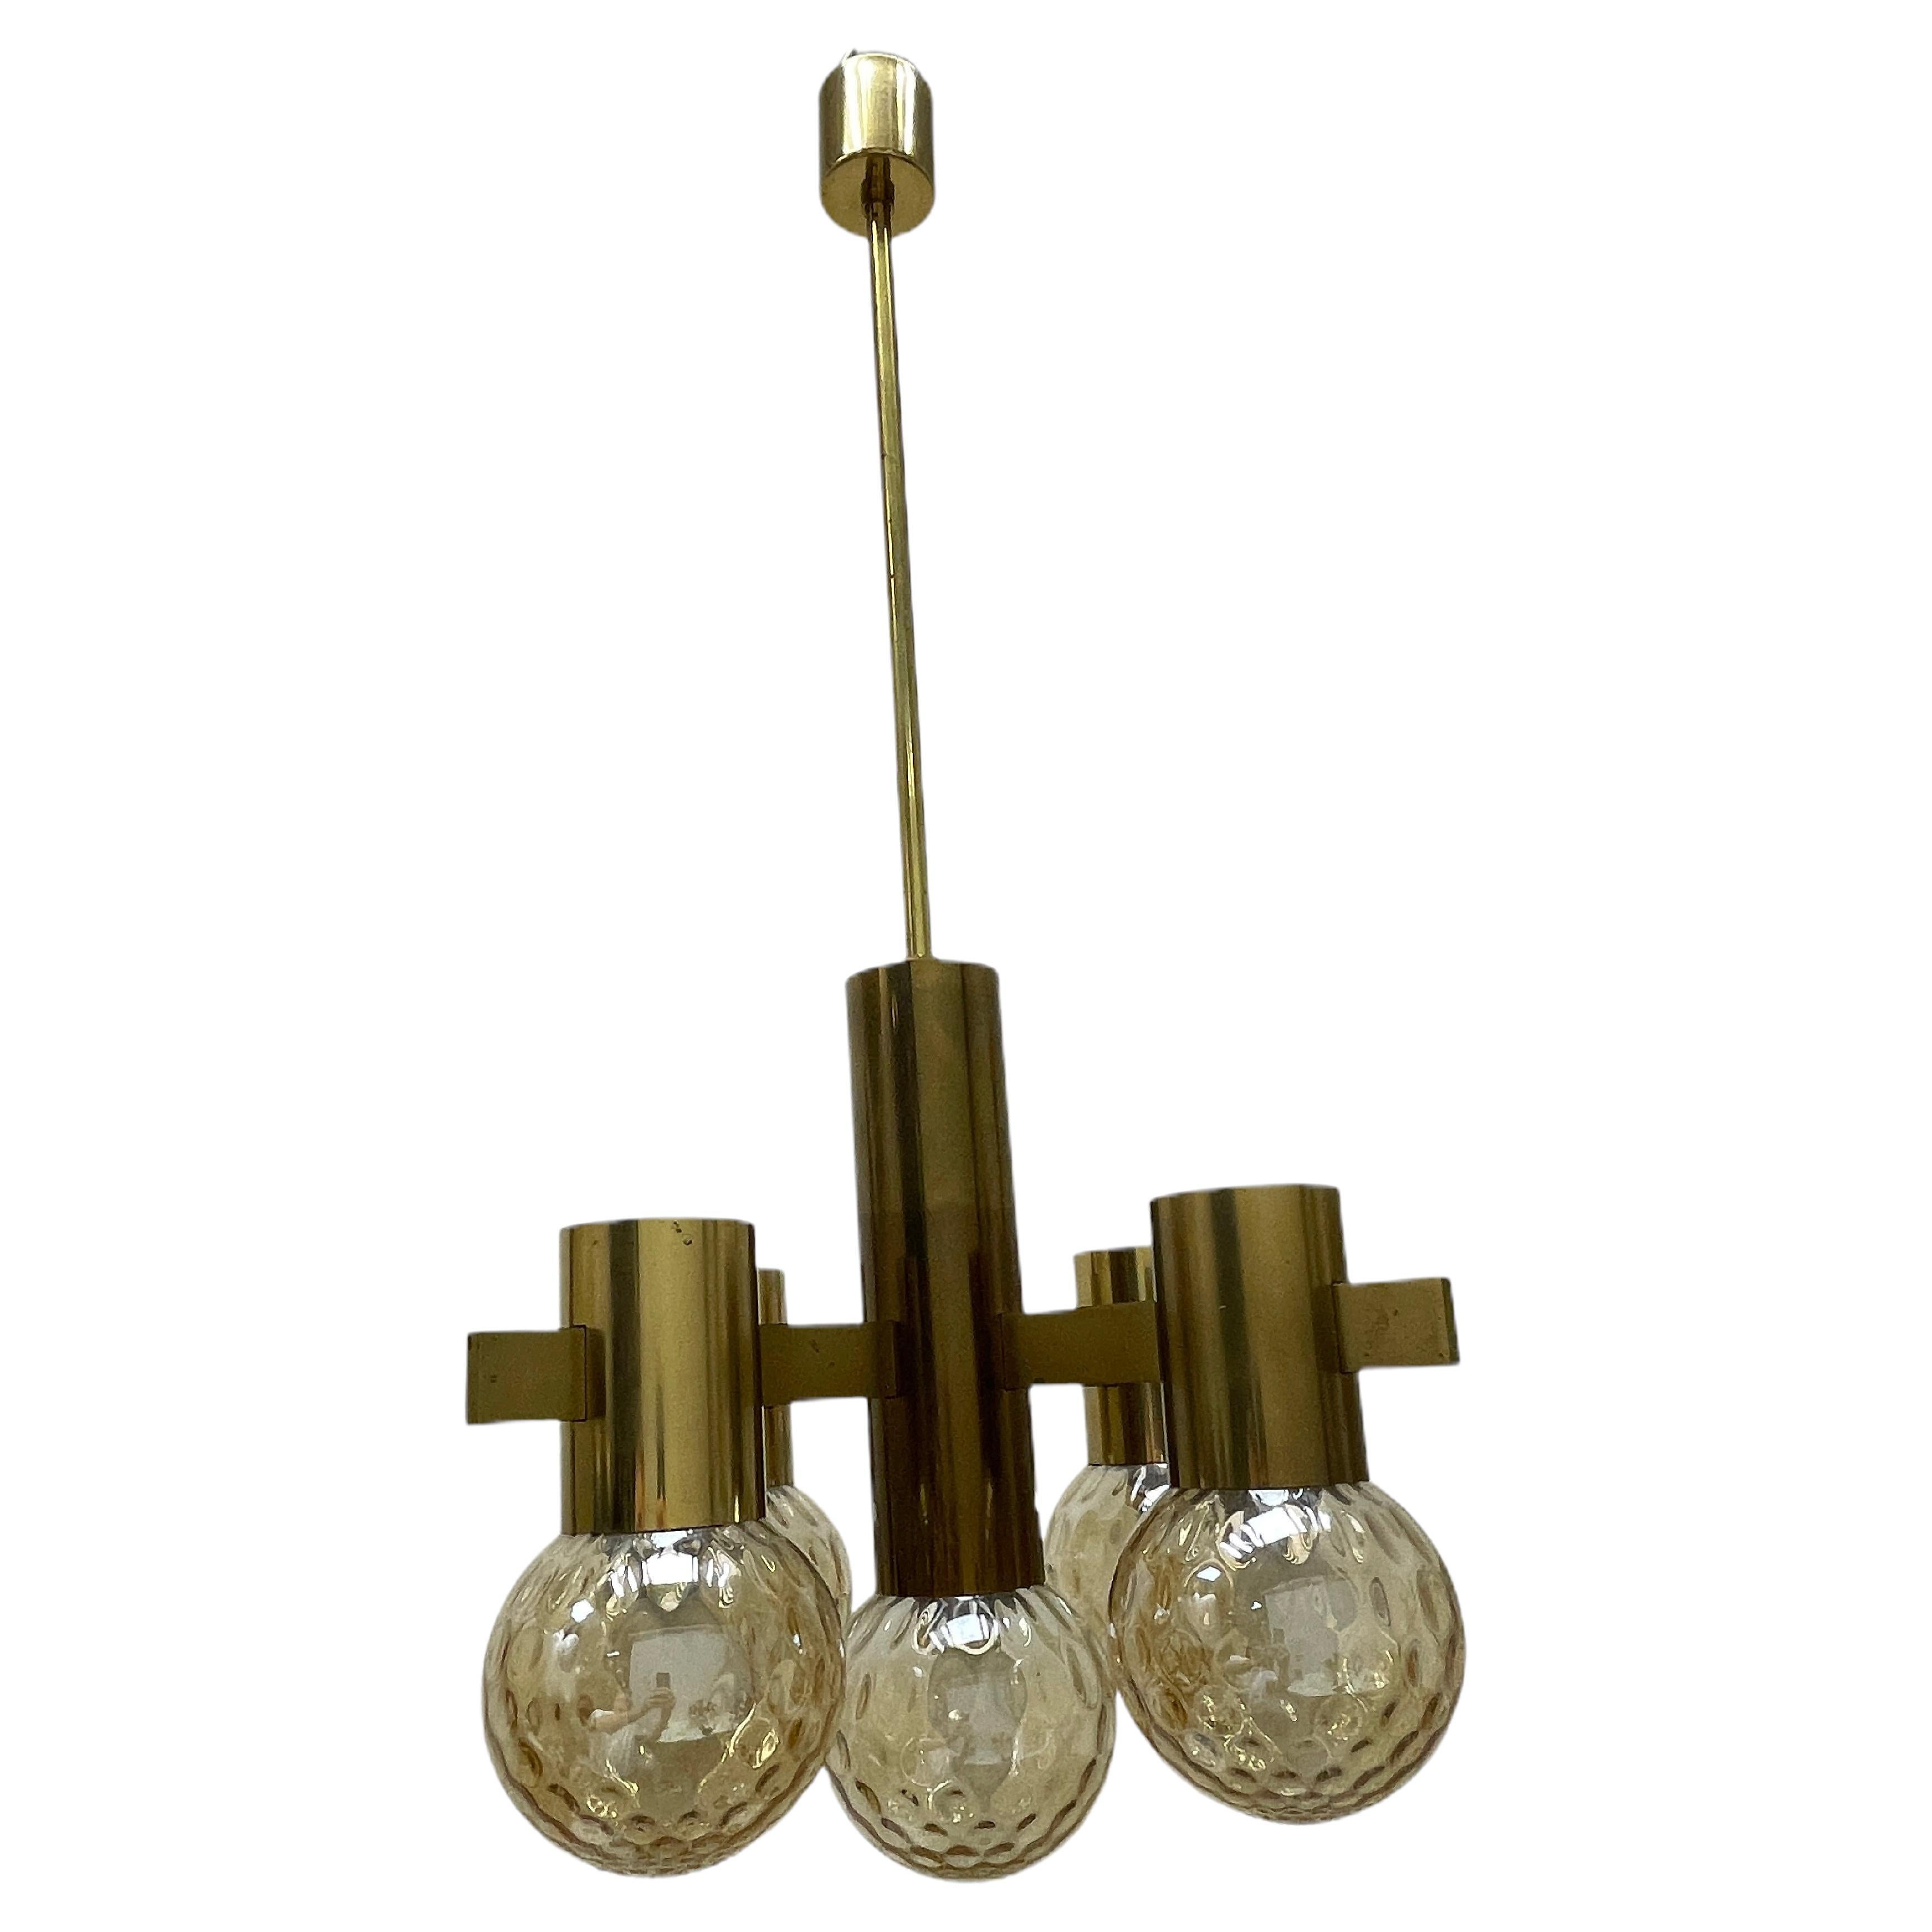 Very decorative and beautiful chandelier made of brass, fitted with five E14 sockets with glass ball shades. Made by Hans Agne Jakobsseon in the 1960s. The fixture requires five European E14 / 110 Volt bulbs, each bulb up to 40 watts. The brass has